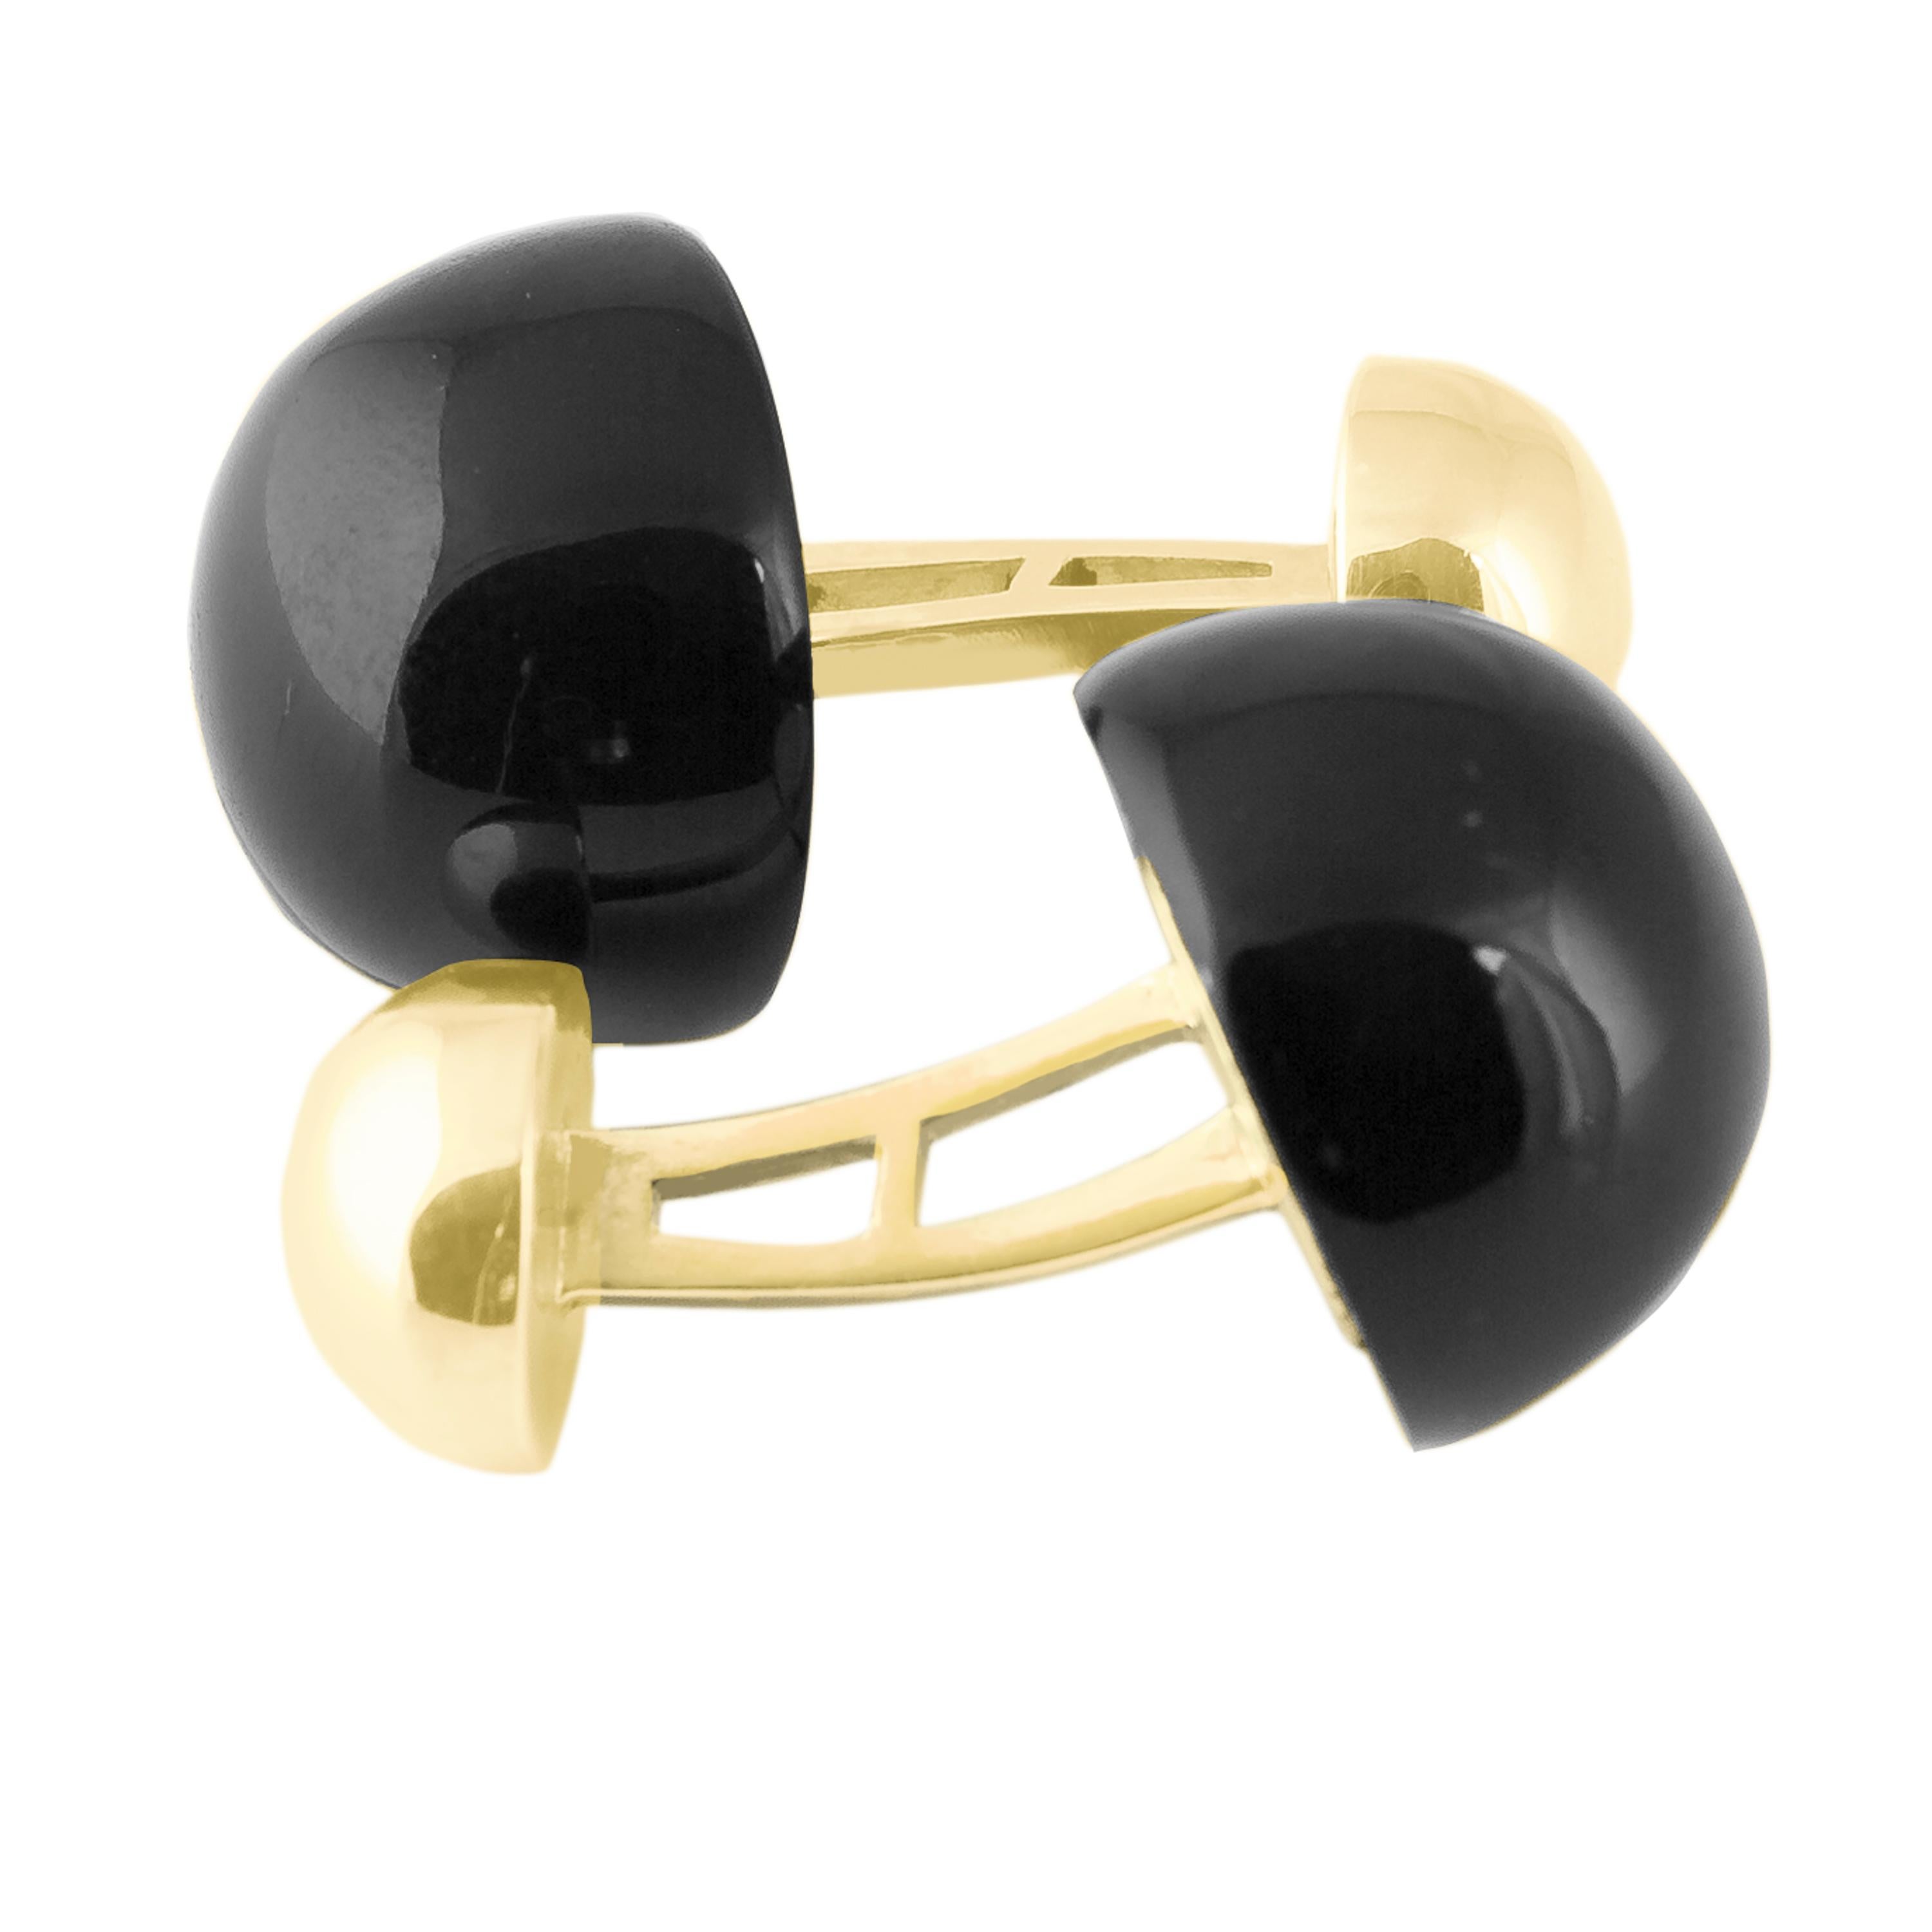 These statement 18 Karat Gold & Black Onyx cufflinks are from our Torran collection, the boldest and most dramatic of our range.

The cufflinks are designed and made to order (**see below) in our UK workshop.  Designed to showcase the natural beauty